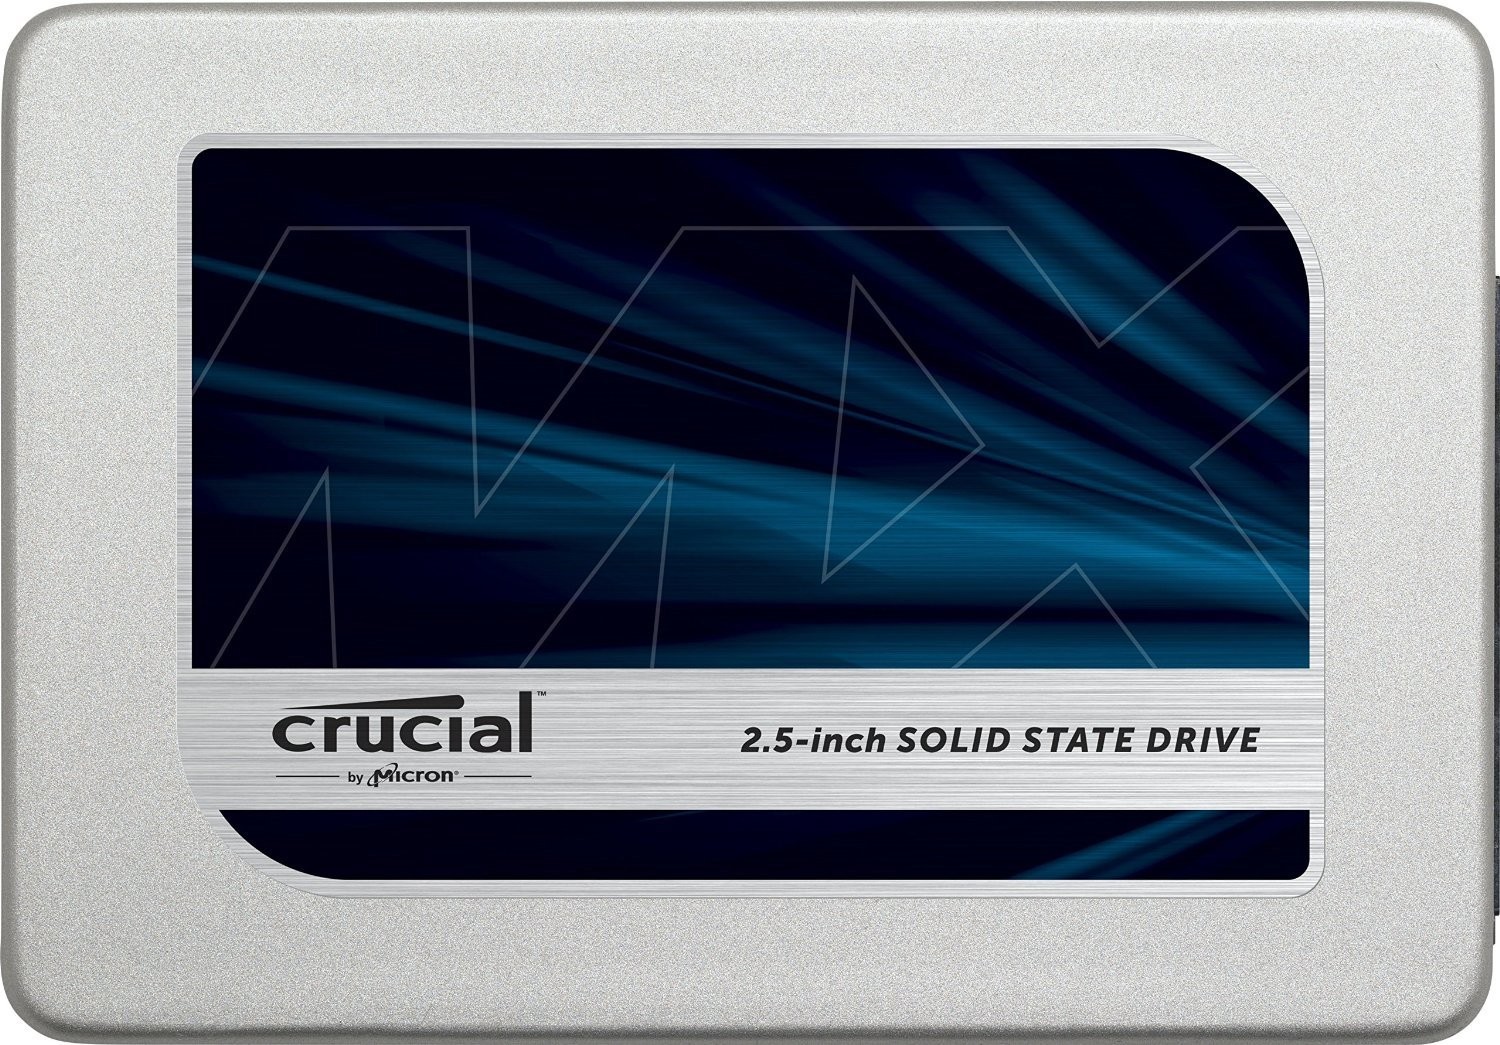 Media asset in full size related to 3dfxzone.it news item entitled as follows: Crucial introduce il drive a stato solido SSD MX300 750GB con 3D NAND | Image Name: news24452_Crucial-SSD-MX300-750GB_2.jpg